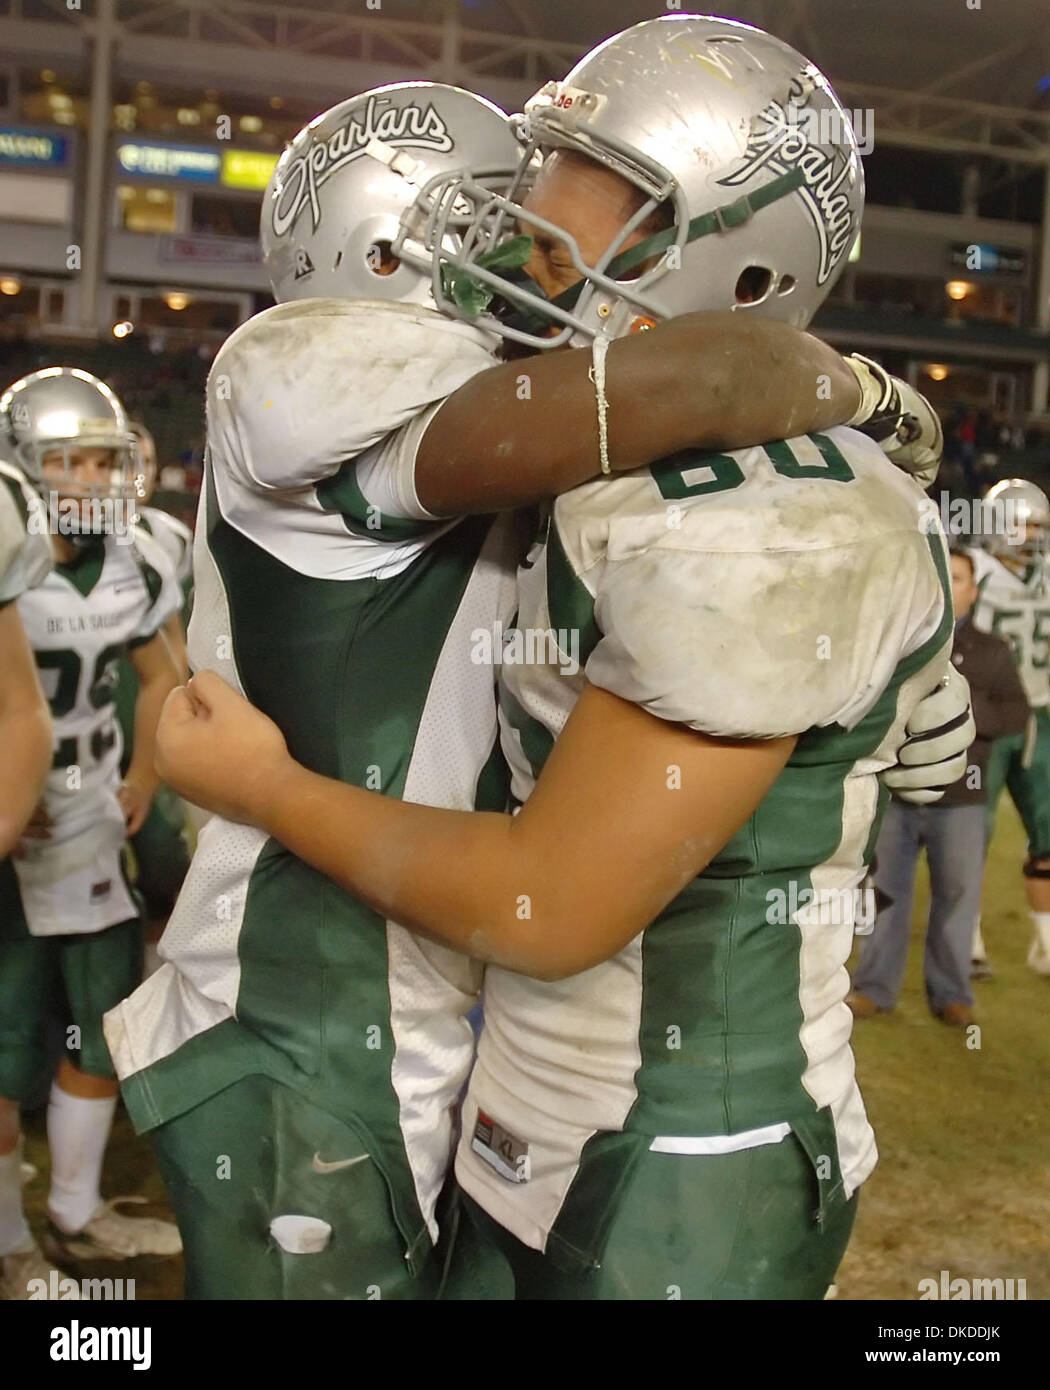 Dec 16, 2006; Carson, CA, USA; De La Salle's PAUL WRIGHT, #16, consoles teammate ALBERT SIU, #60, after their lost to Canyon during the California Interscholastic Federation State Football Championship Bowl Game Division One on Saturday, December 16, 2006 at the Home Depot Center in Carson, Calif. Canyon defeated De La Salle 27-13. Mandatory Credit: Photo by Jose Carlos Fajardo/Con Stock Photo